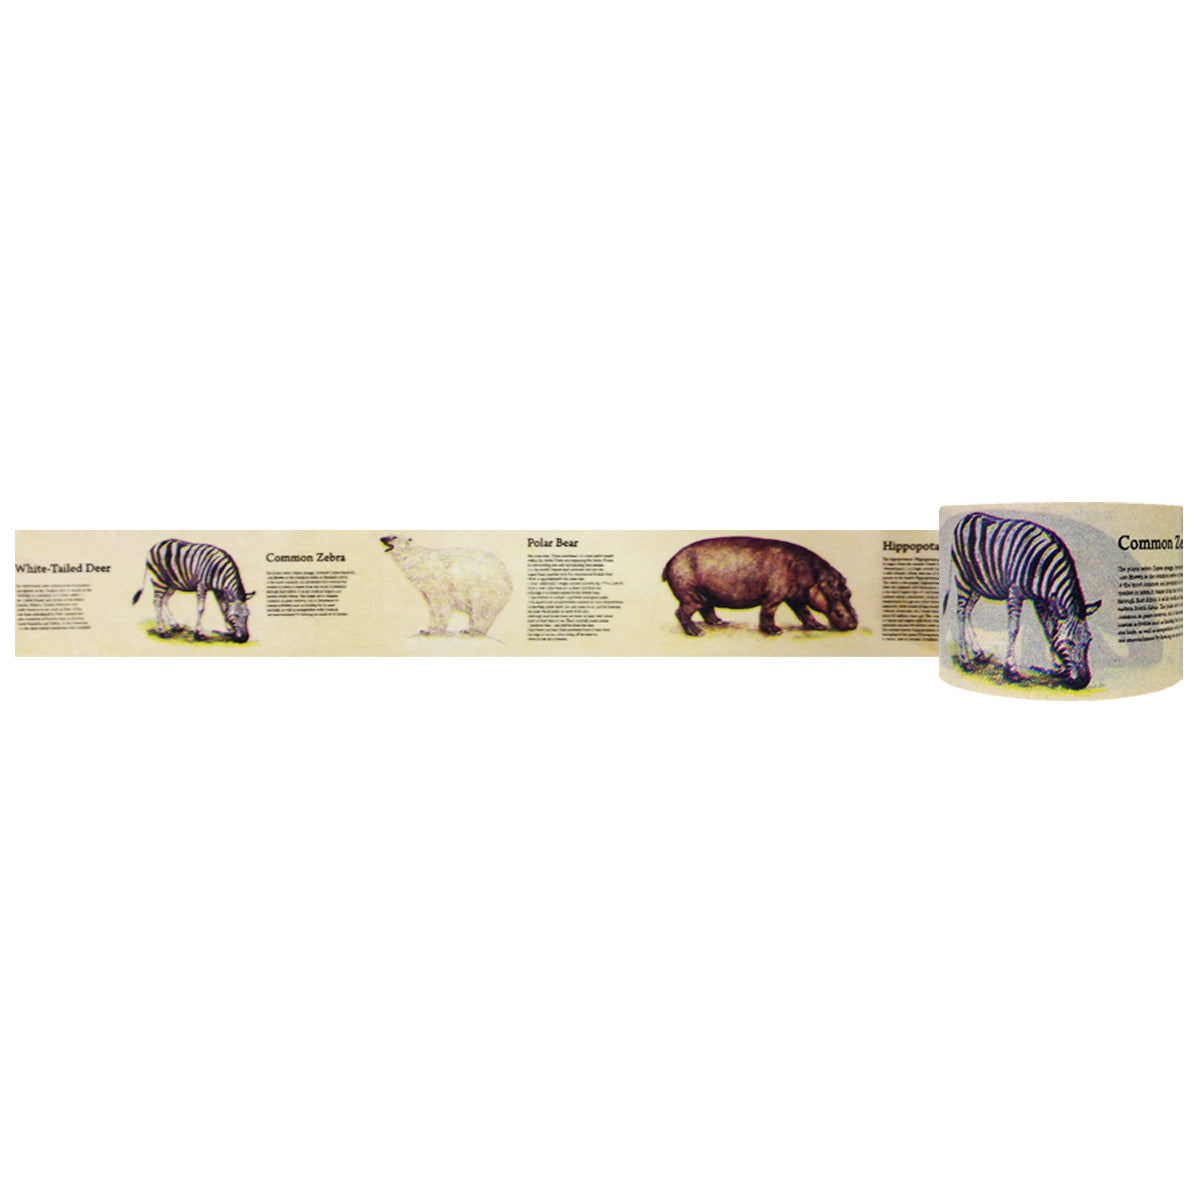 Wrapables Floral & Nature Washi Masking Tape, At the Zoo